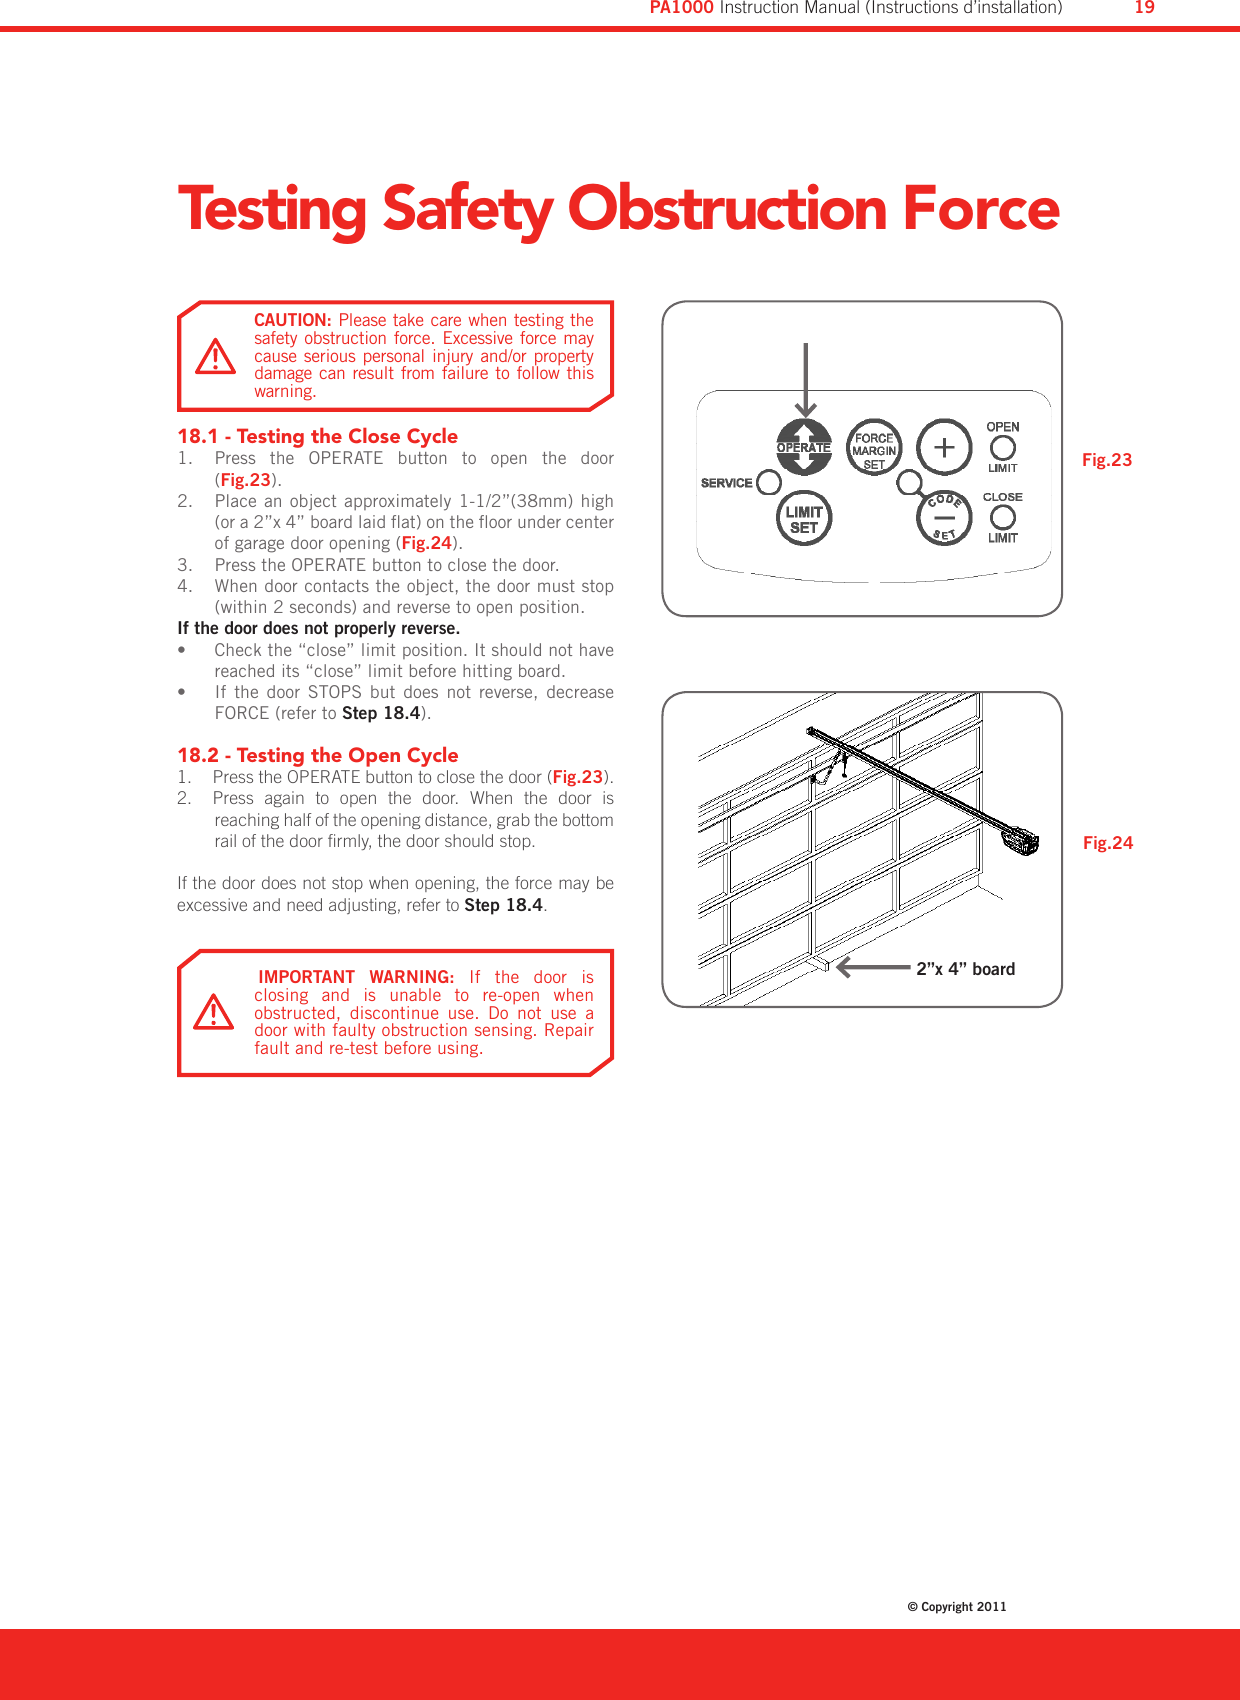 Testing Safety Obstruction Force18.1 - Testing the Close CyclePress  the  OPERATE  button  to  open  the  door 1. (Fig.23).Place an object approximately 1-1/2”(38mm) high 2. (or a 2”x 4” board laid at) on the oor under center of garage door opening (Fig.24).Press the OPERATE button to close the door.3. When door contacts the object, the door must stop 4. (within 2 seconds) and reverse to open position.If the door does not properly reverse.Check the “close” limit position. It should not have • reached its “close” limit before hitting board.If  the  door  STOPS  but  does  not  reverse,  decrease • FORCE (refer to Step 18.4).18.2 - Testing the Open Cycle  Press the OPERATE button to close the door (1.  Fig.23).  Press  again  to  open  the  door.  When  the  door  is 2. reaching half of the opening distance, grab the bottom rail of the door rmly, the door should stop.If the door does not stop when opening, the force may be excessive and need adjusting, refer to Step 18.4.Fig.24Fig.23IMPORTANT  WARNING:  If  the  door  is closing  and  is  unable  to  re-open  when obstructed,  discontinue  use.  Do  not  use  a door with faulty obstruction sensing. Repair fault and re-test before using.CAUTION: Please take care when testing the safety obstruction  force.  Excessive force  may cause  serious  personal  injury  and/or  property damage can  result from  failure to  follow this warning.2”x 4” boardDiamond PD Power Drive : Instruction Manual© Copyright 201119PA1000 Instruction Manual (Instructions d’installation)